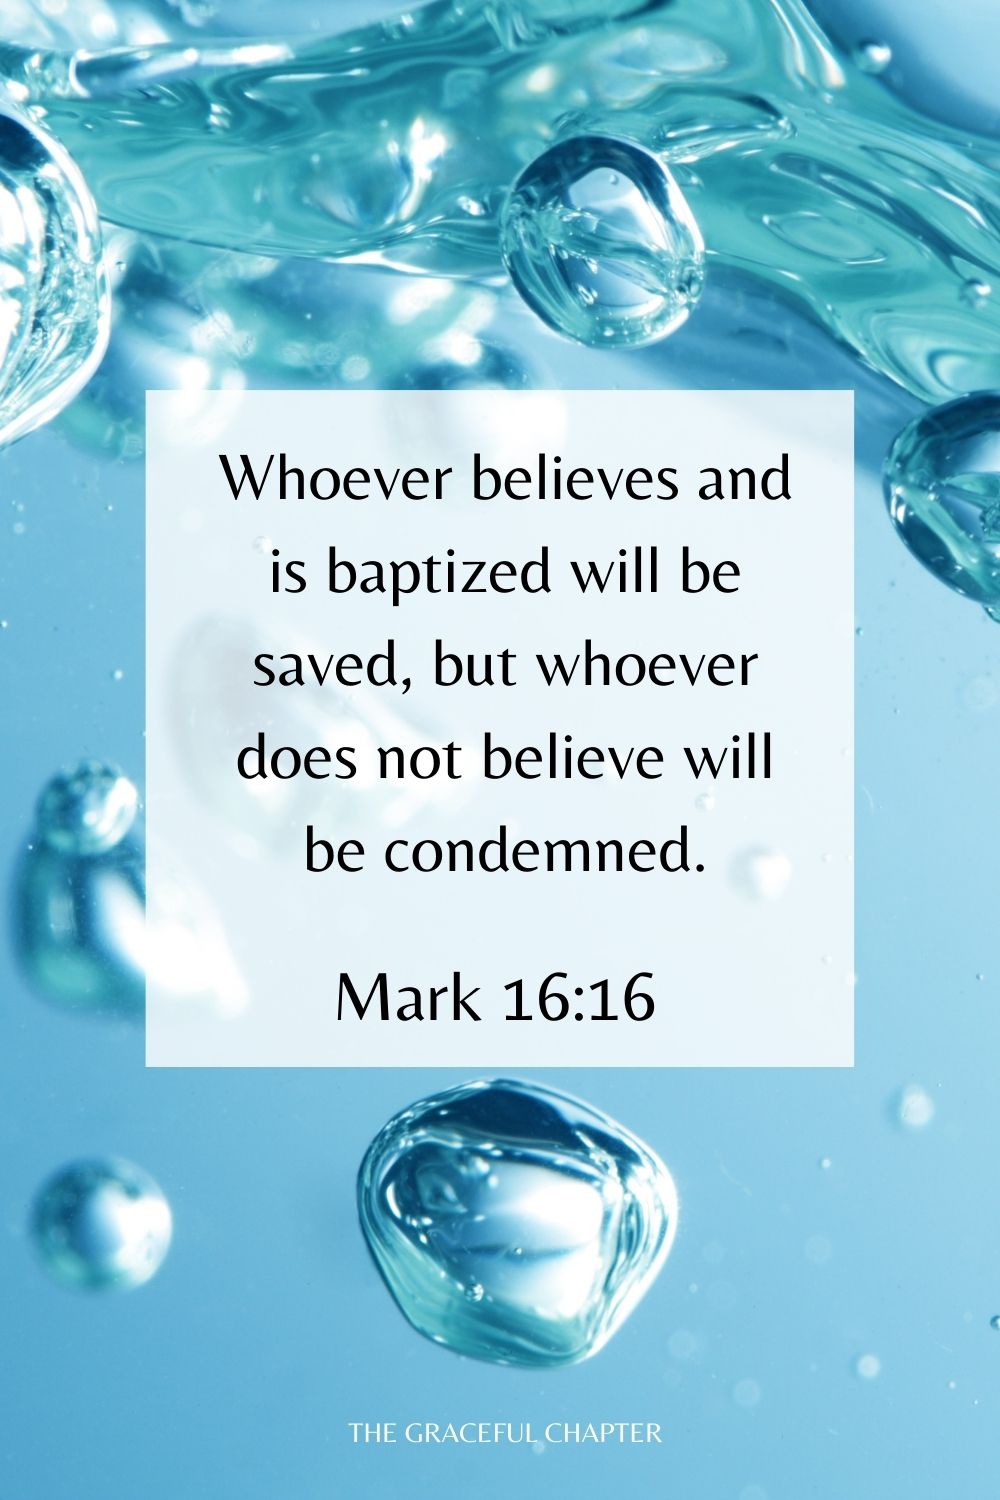 Whoever believes and is baptized will be saved, but whoever does not believe will be condemned. Mark 16:16